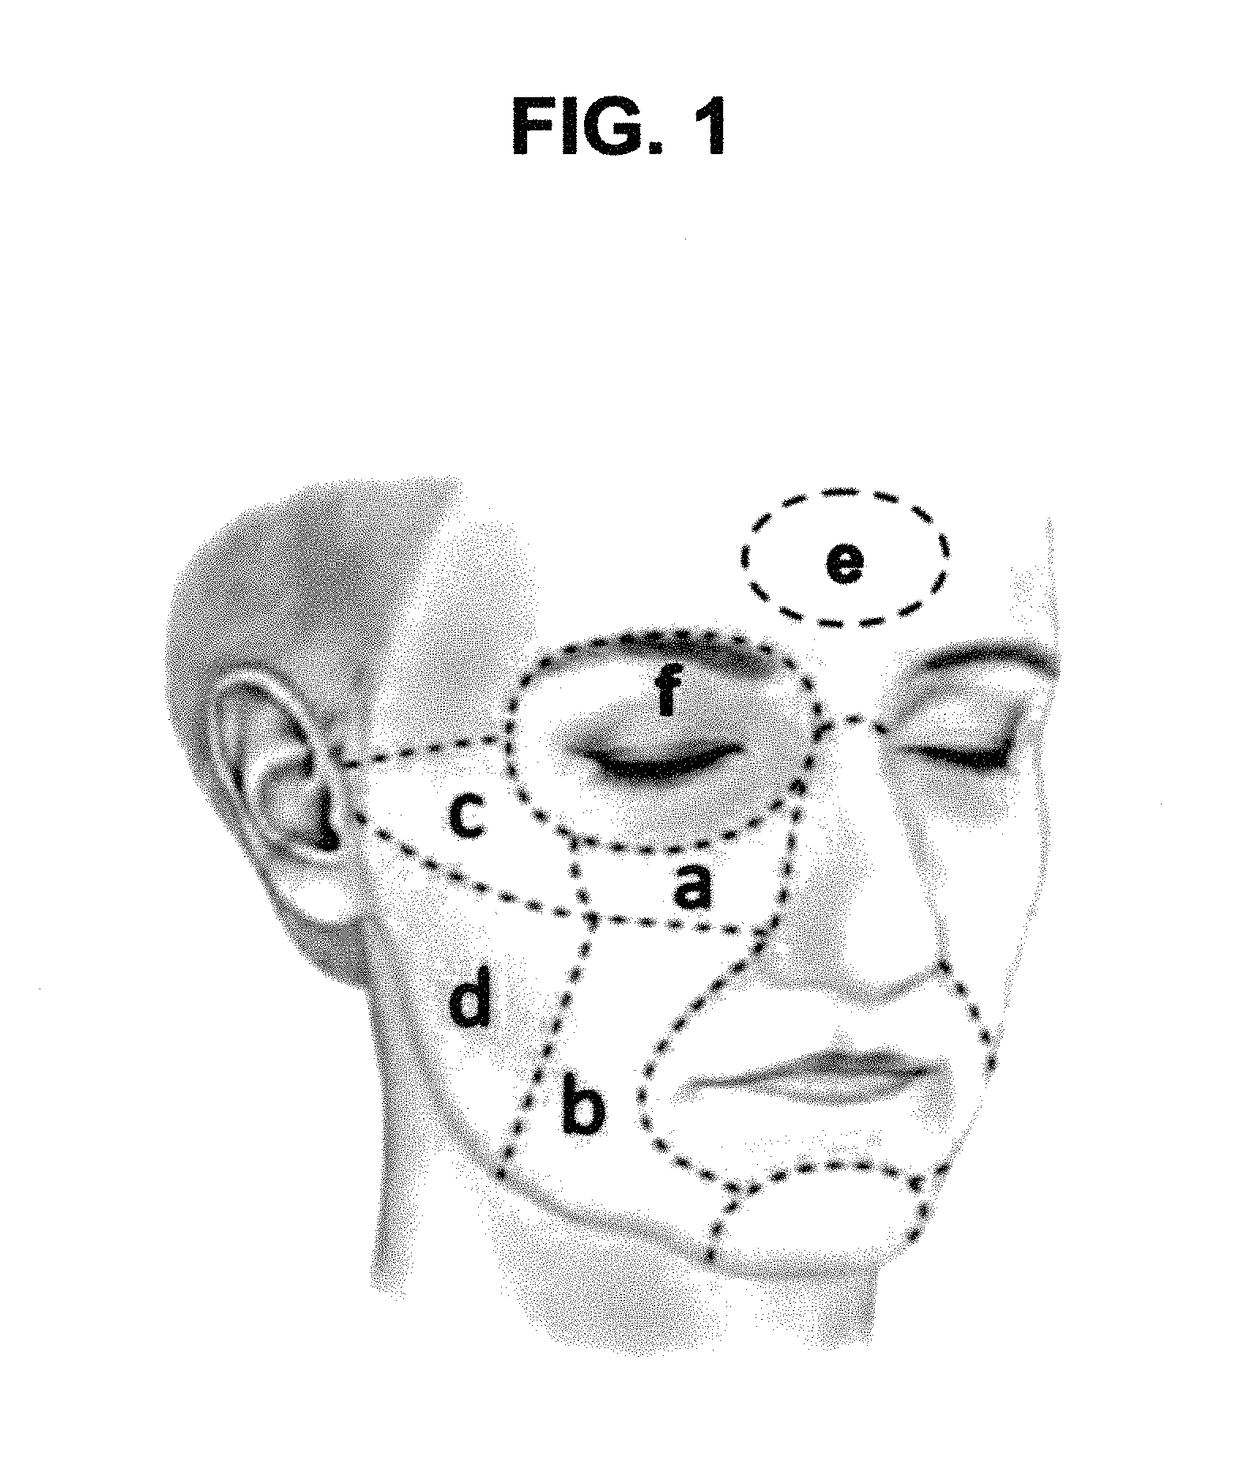 Di-isopropyl-phosphinoyl-alkanes as topical agents for the treatment of sensory discomfort